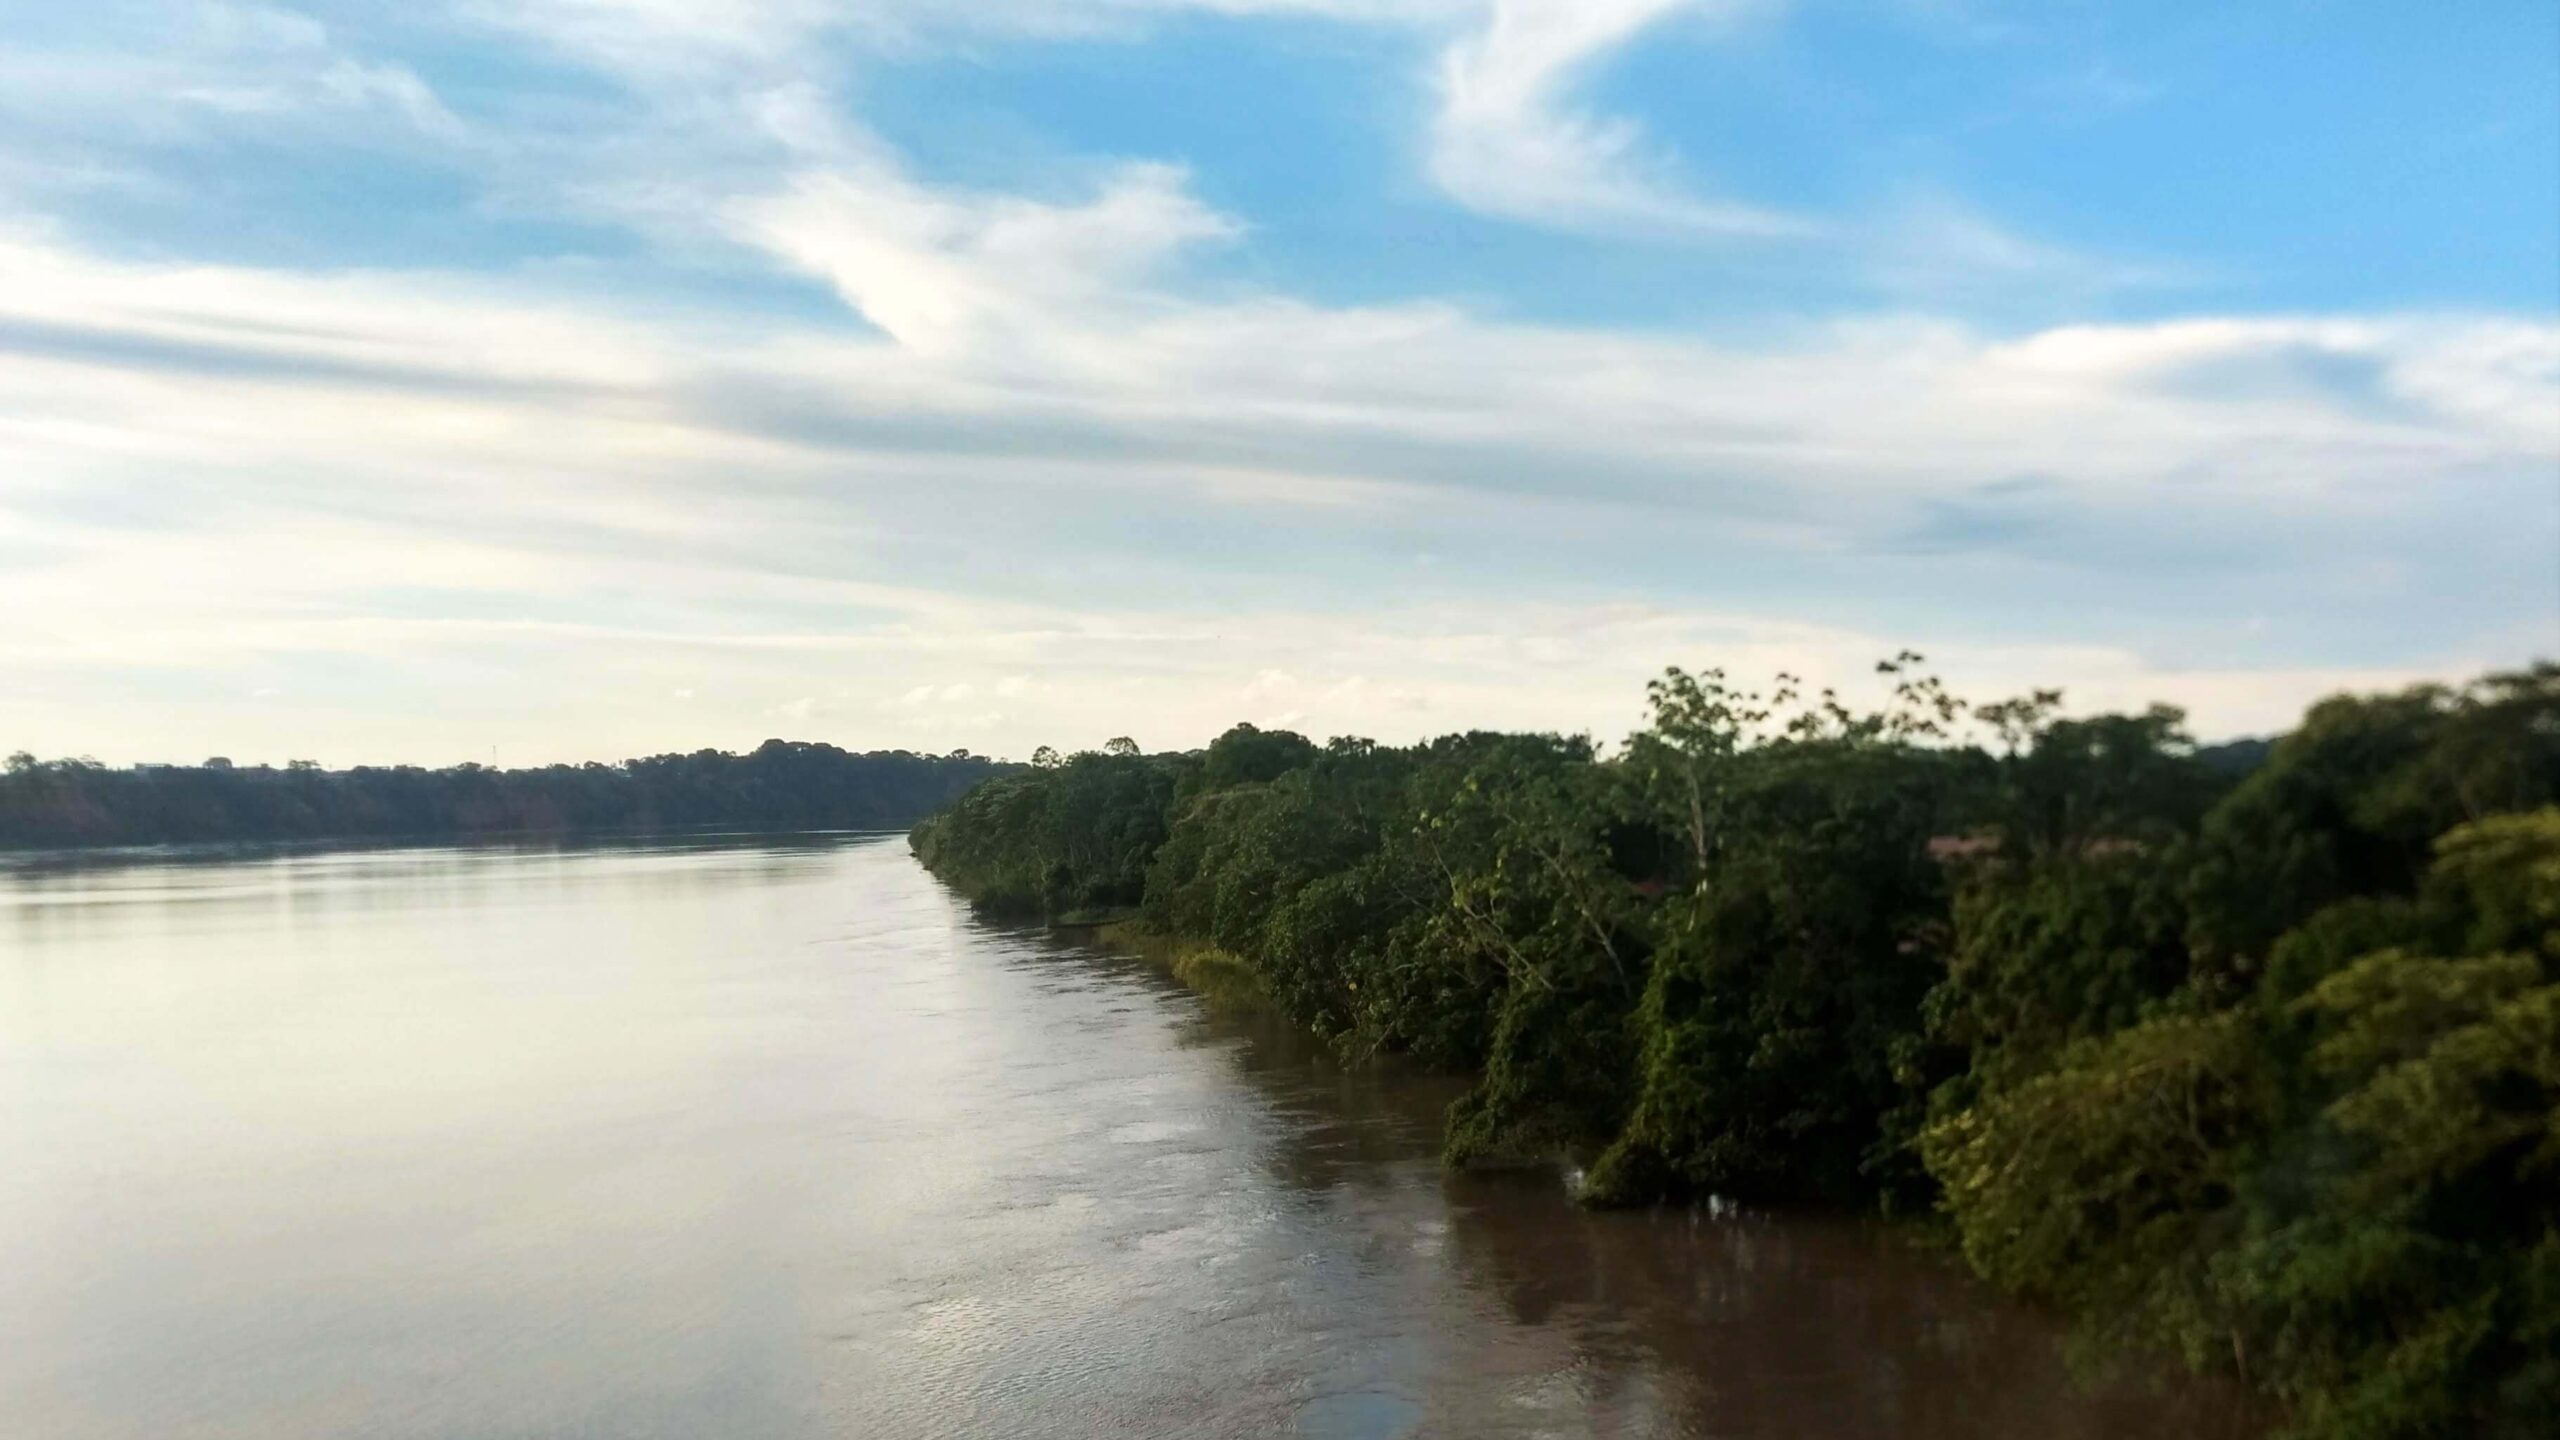 View of the Madre de Dios River